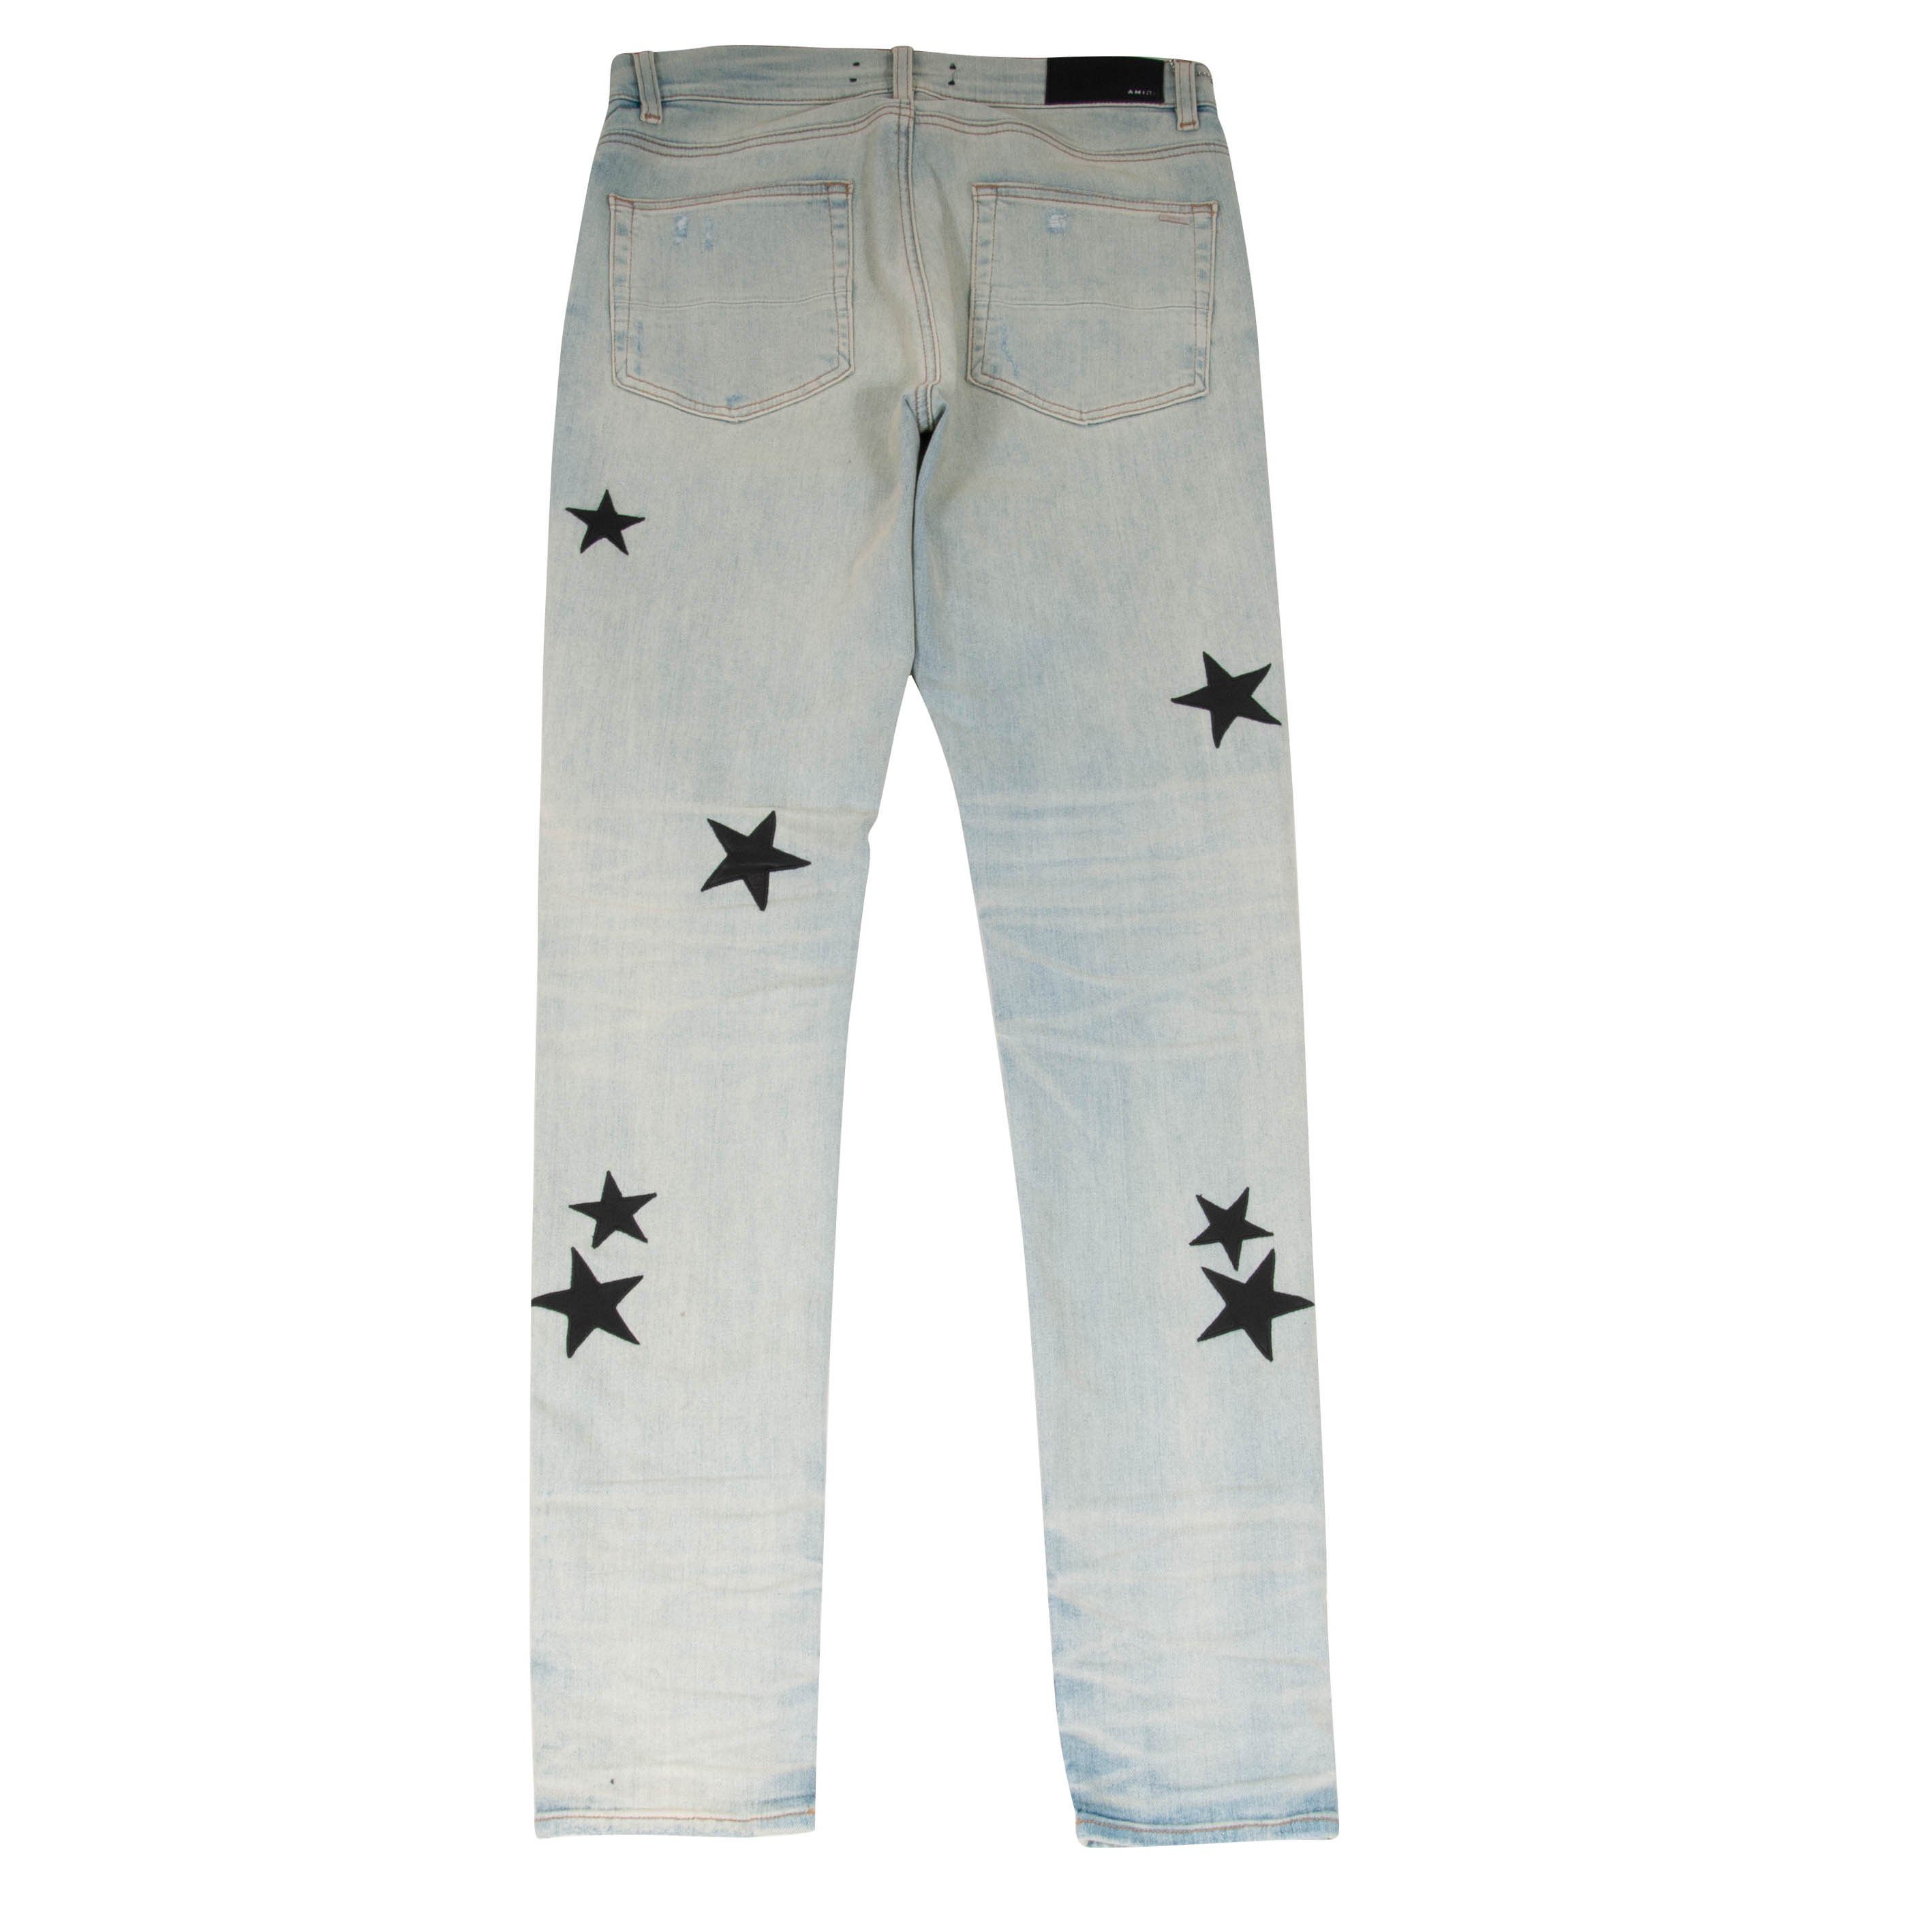 Men's Leather Stars Patches Design Jeans Streetwear Patchwork